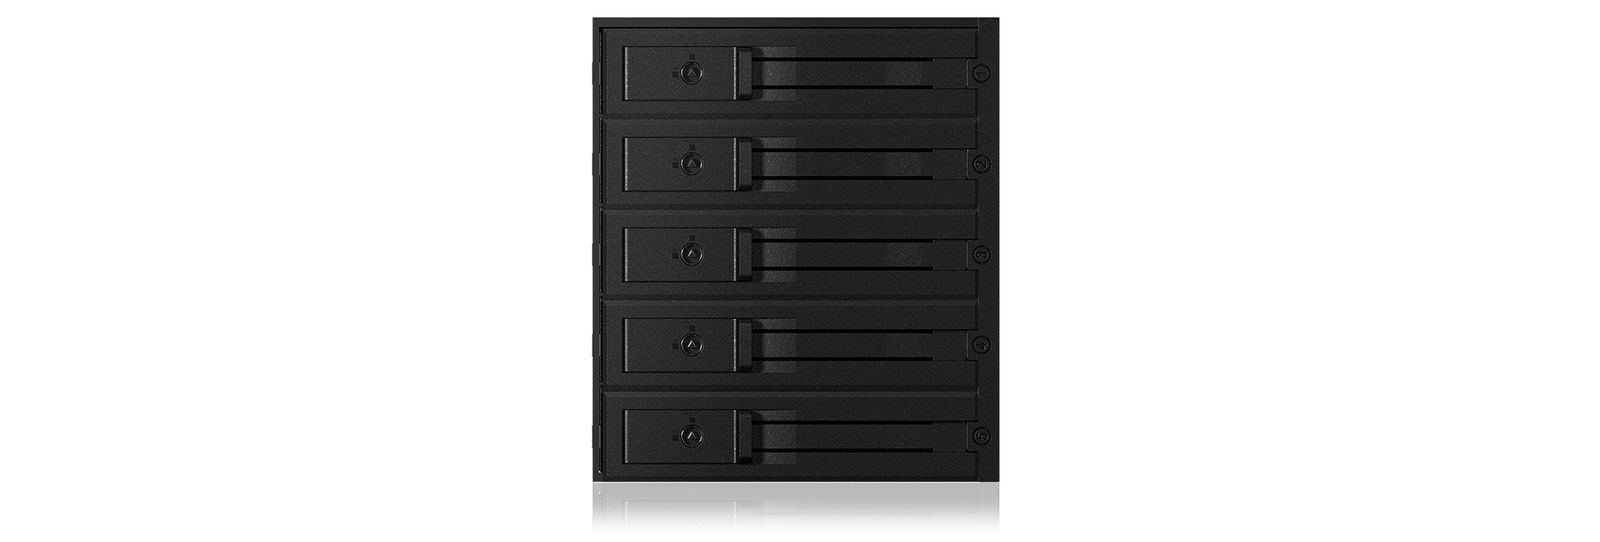 ICY BOX removable backplane for hard disks, 5x 3.5 inch in 3x 5.25 inch bay, SATA, fan, metal, black For 5x 3.5 inch